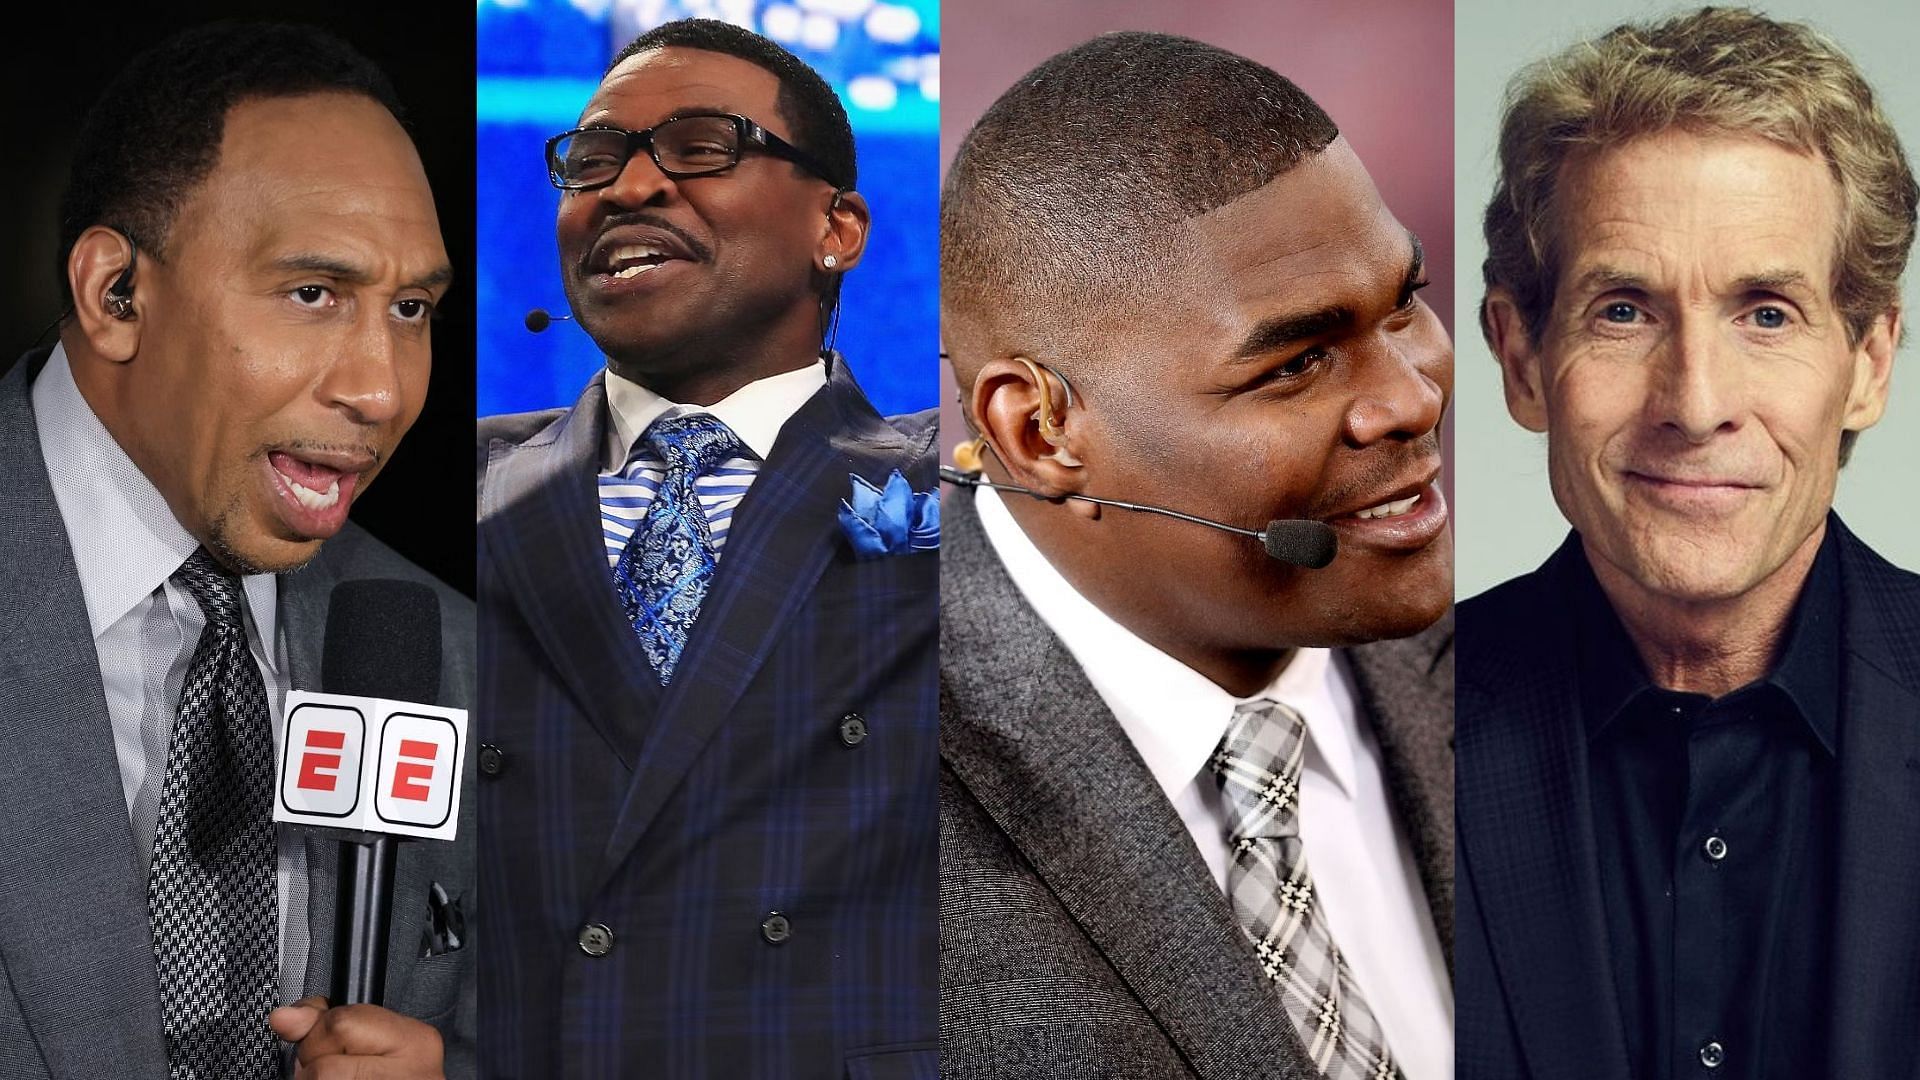 Stephen A Smith is having bittersweet emotions after former colleagues Michael Irvin and Keyshawn Johnson will reportedly join Skip Bayless in FS1